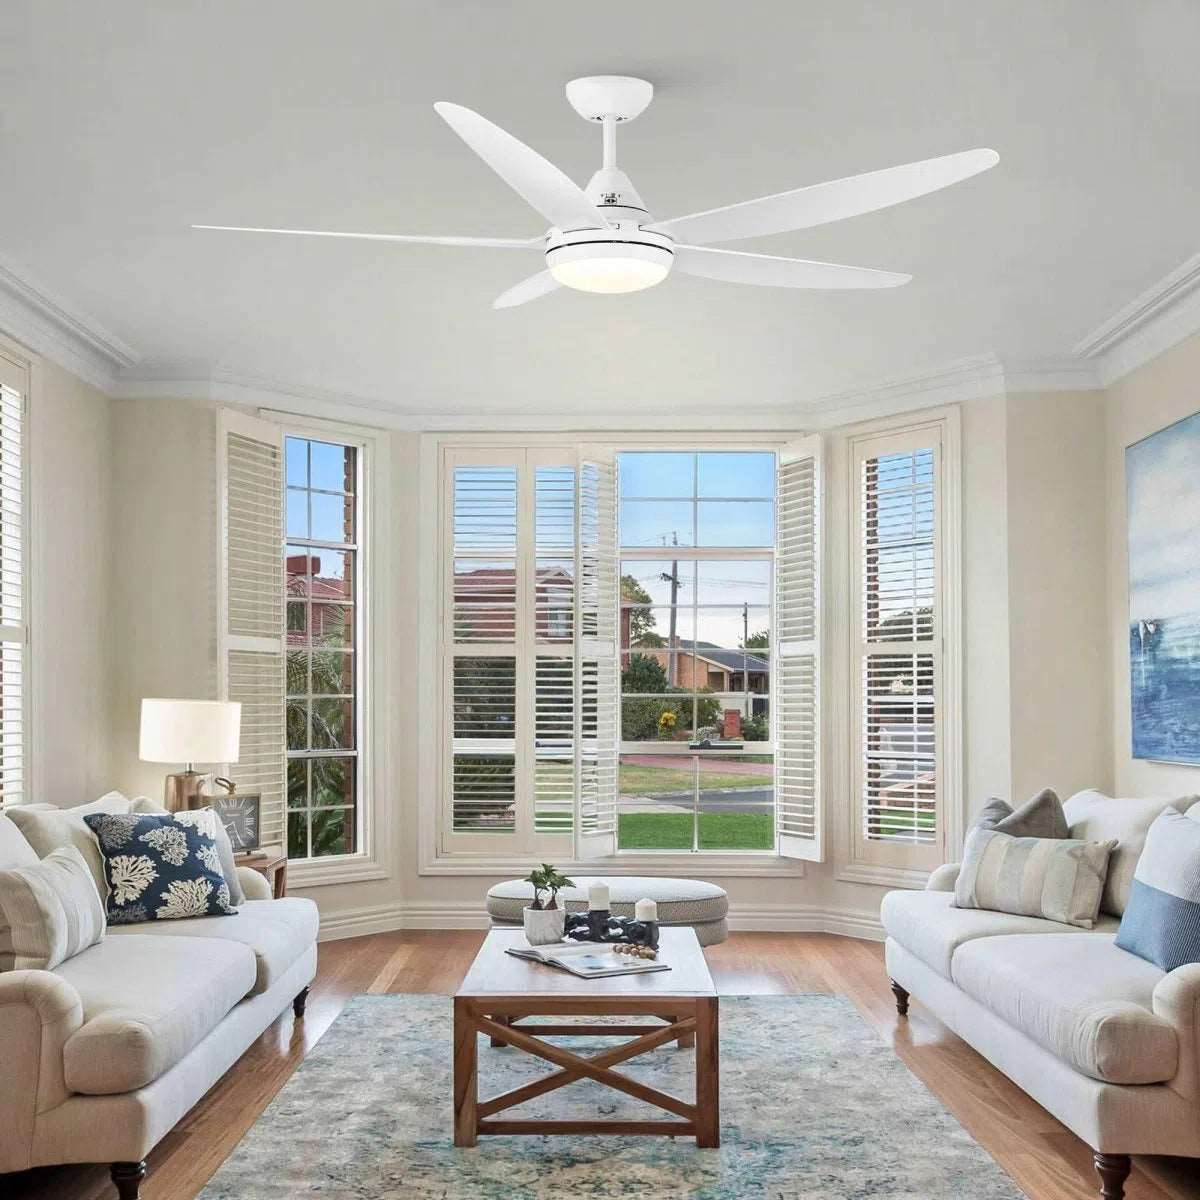 56 in. Dimmable Integrated LED Indoor&Outdoor White Ceiling Fan with DC Motor and Remote Home Decor by Design